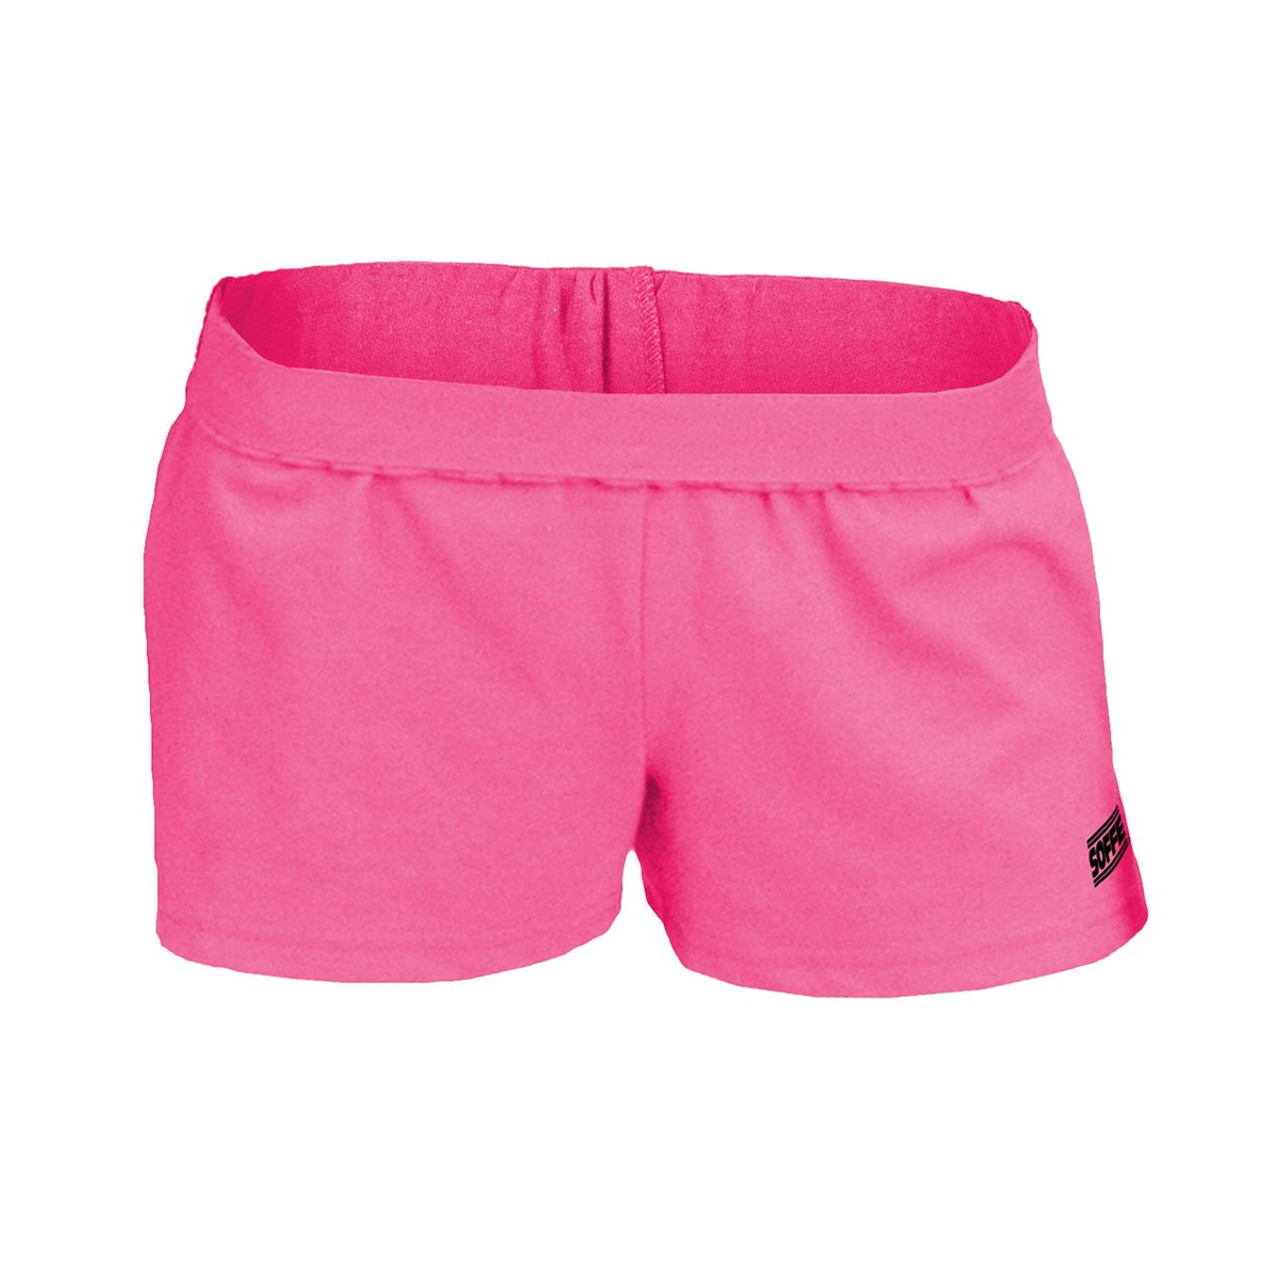 Soffe Junior Girls Low-Rise ‘Soffe' Shorts Youth Large 12-14 3737GHT Lime  Green